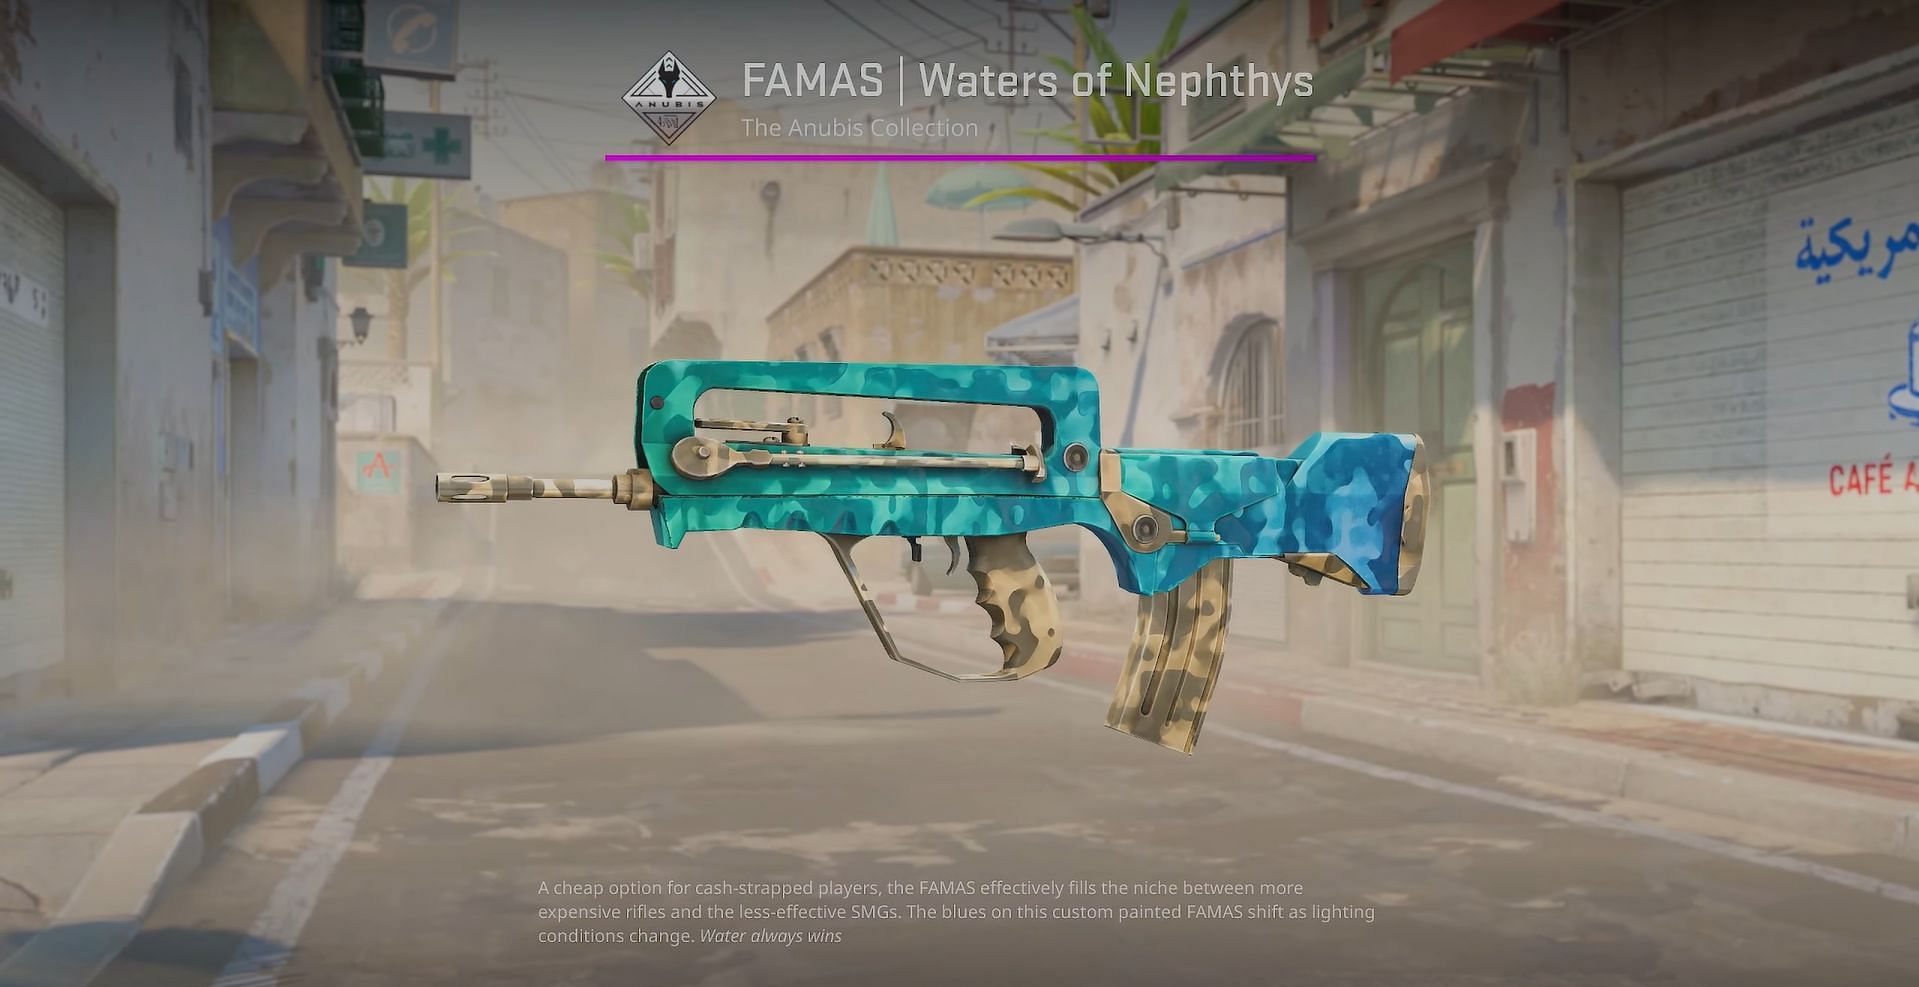 FAMAS Waters of Nephthys (Image via Valve || YouTube/covernant)